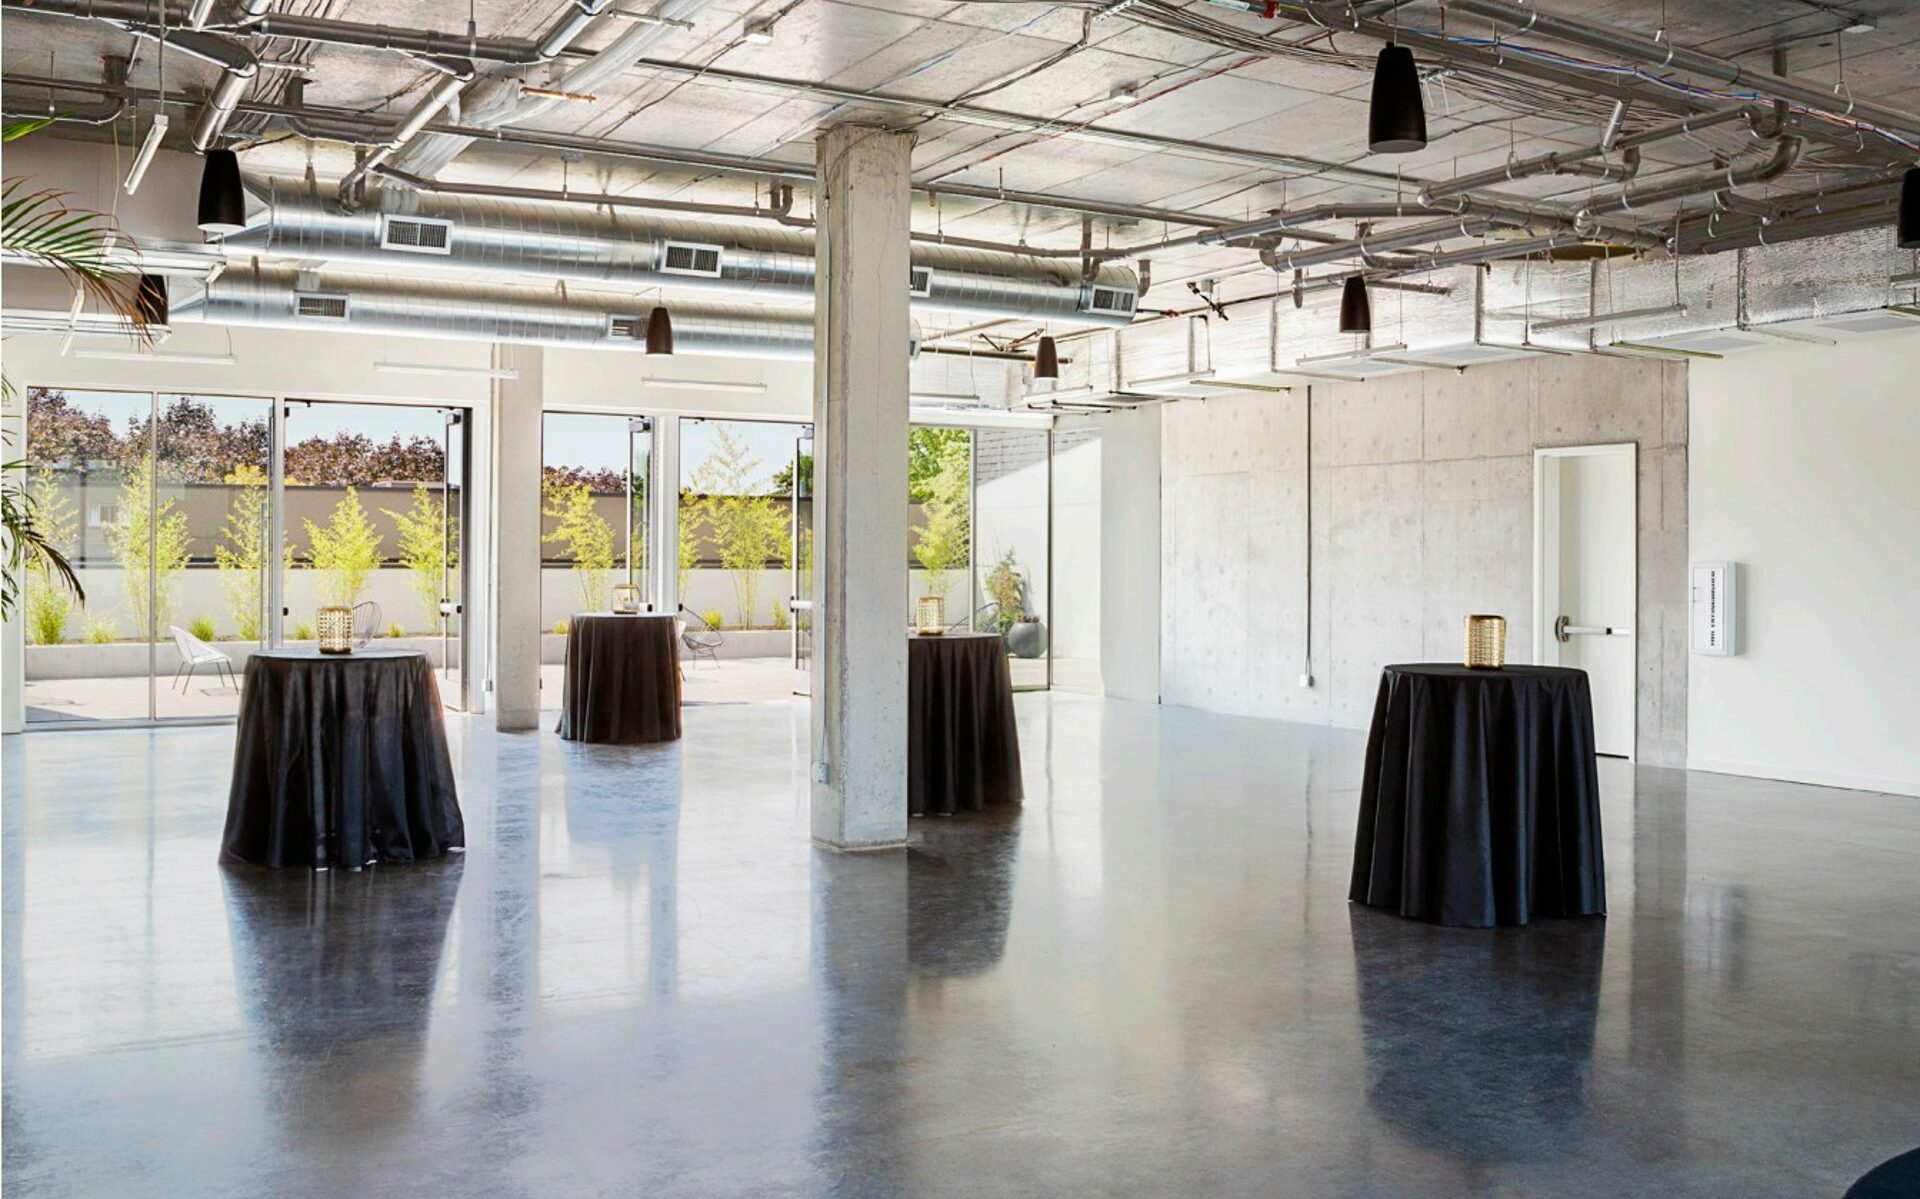 Event space with windows and small tables with black table cloths